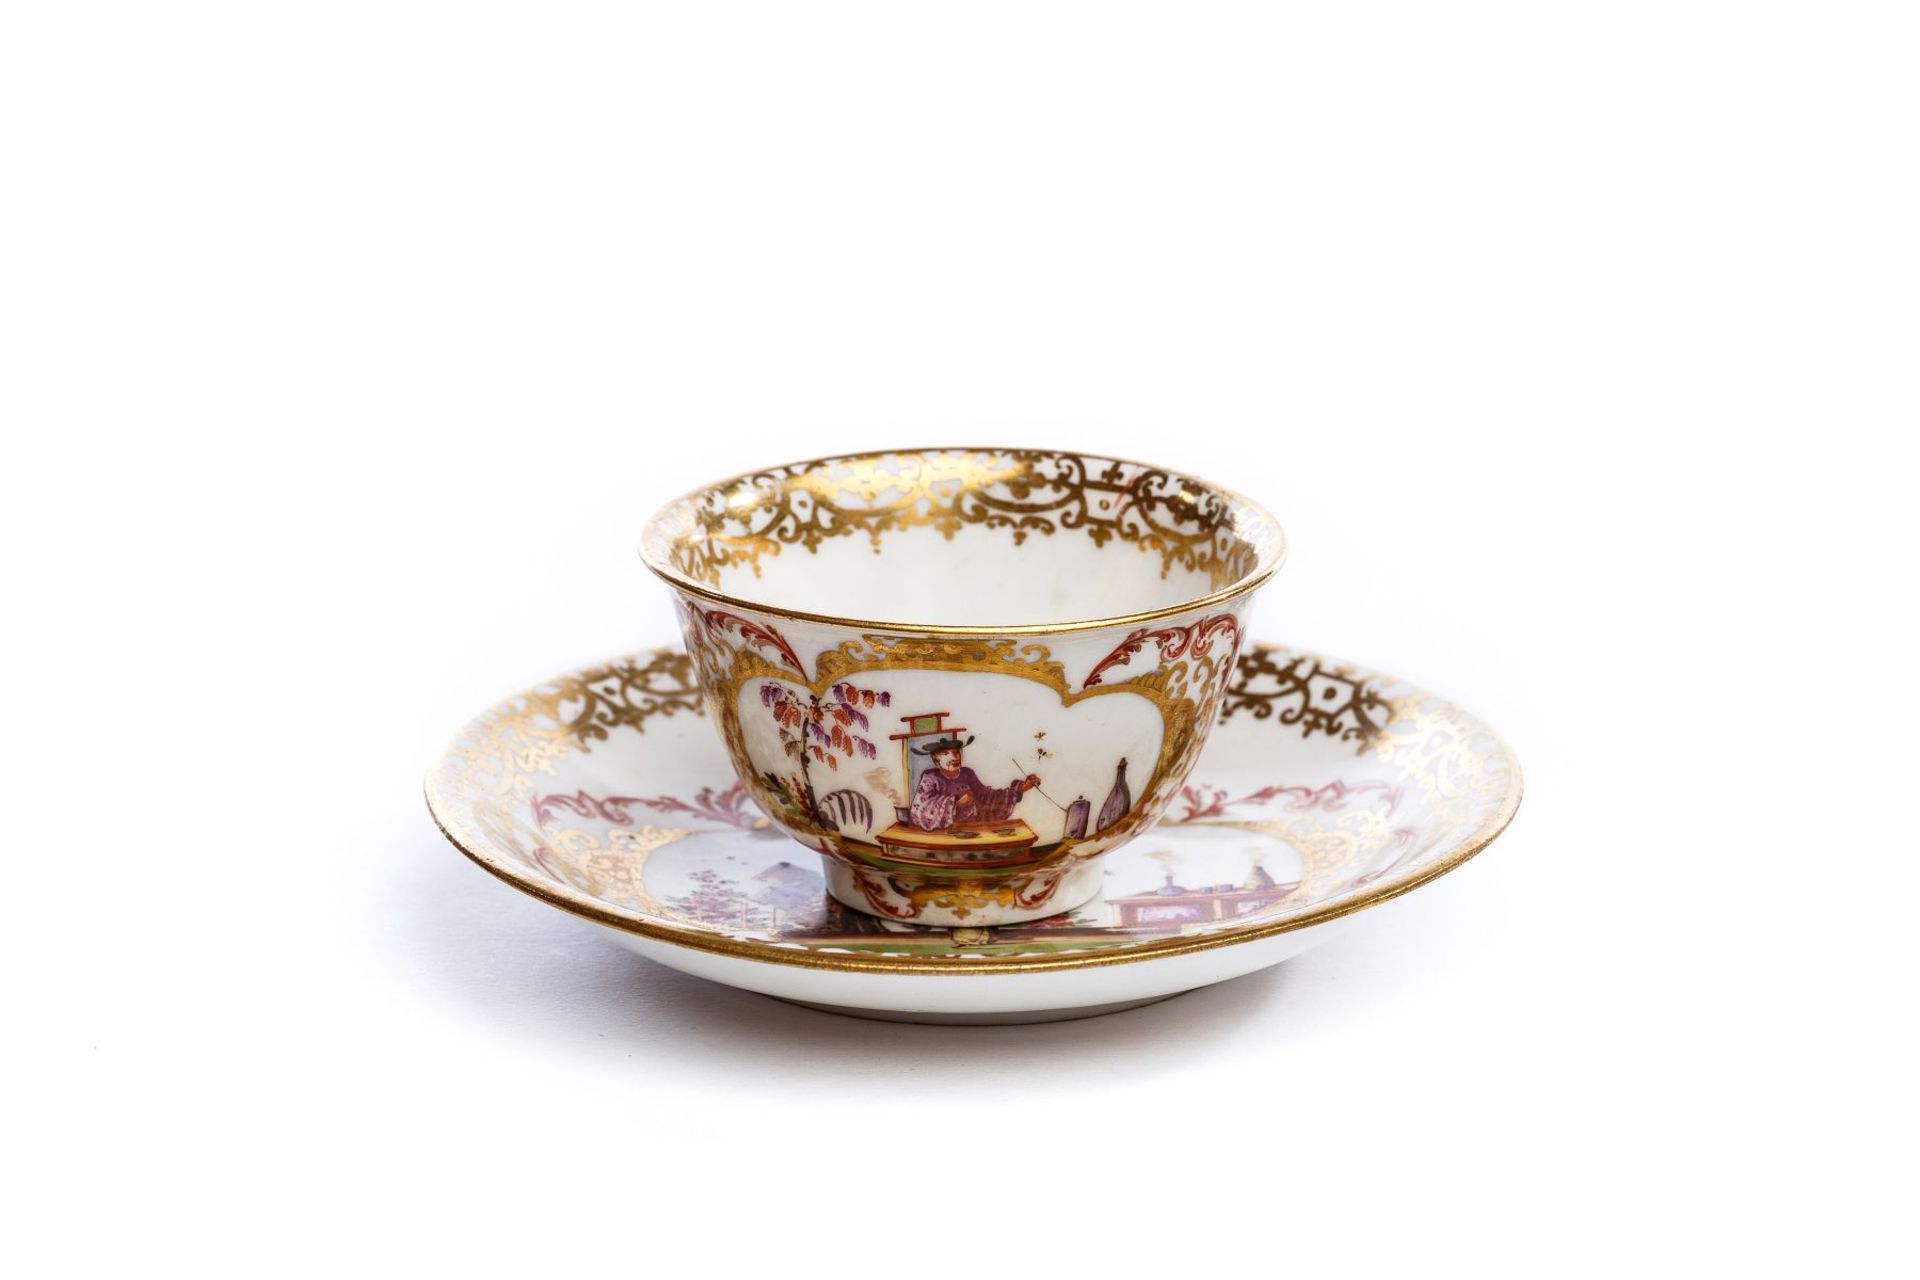 Bowl with saucer, Meissen 1723/25 - Image 3 of 5